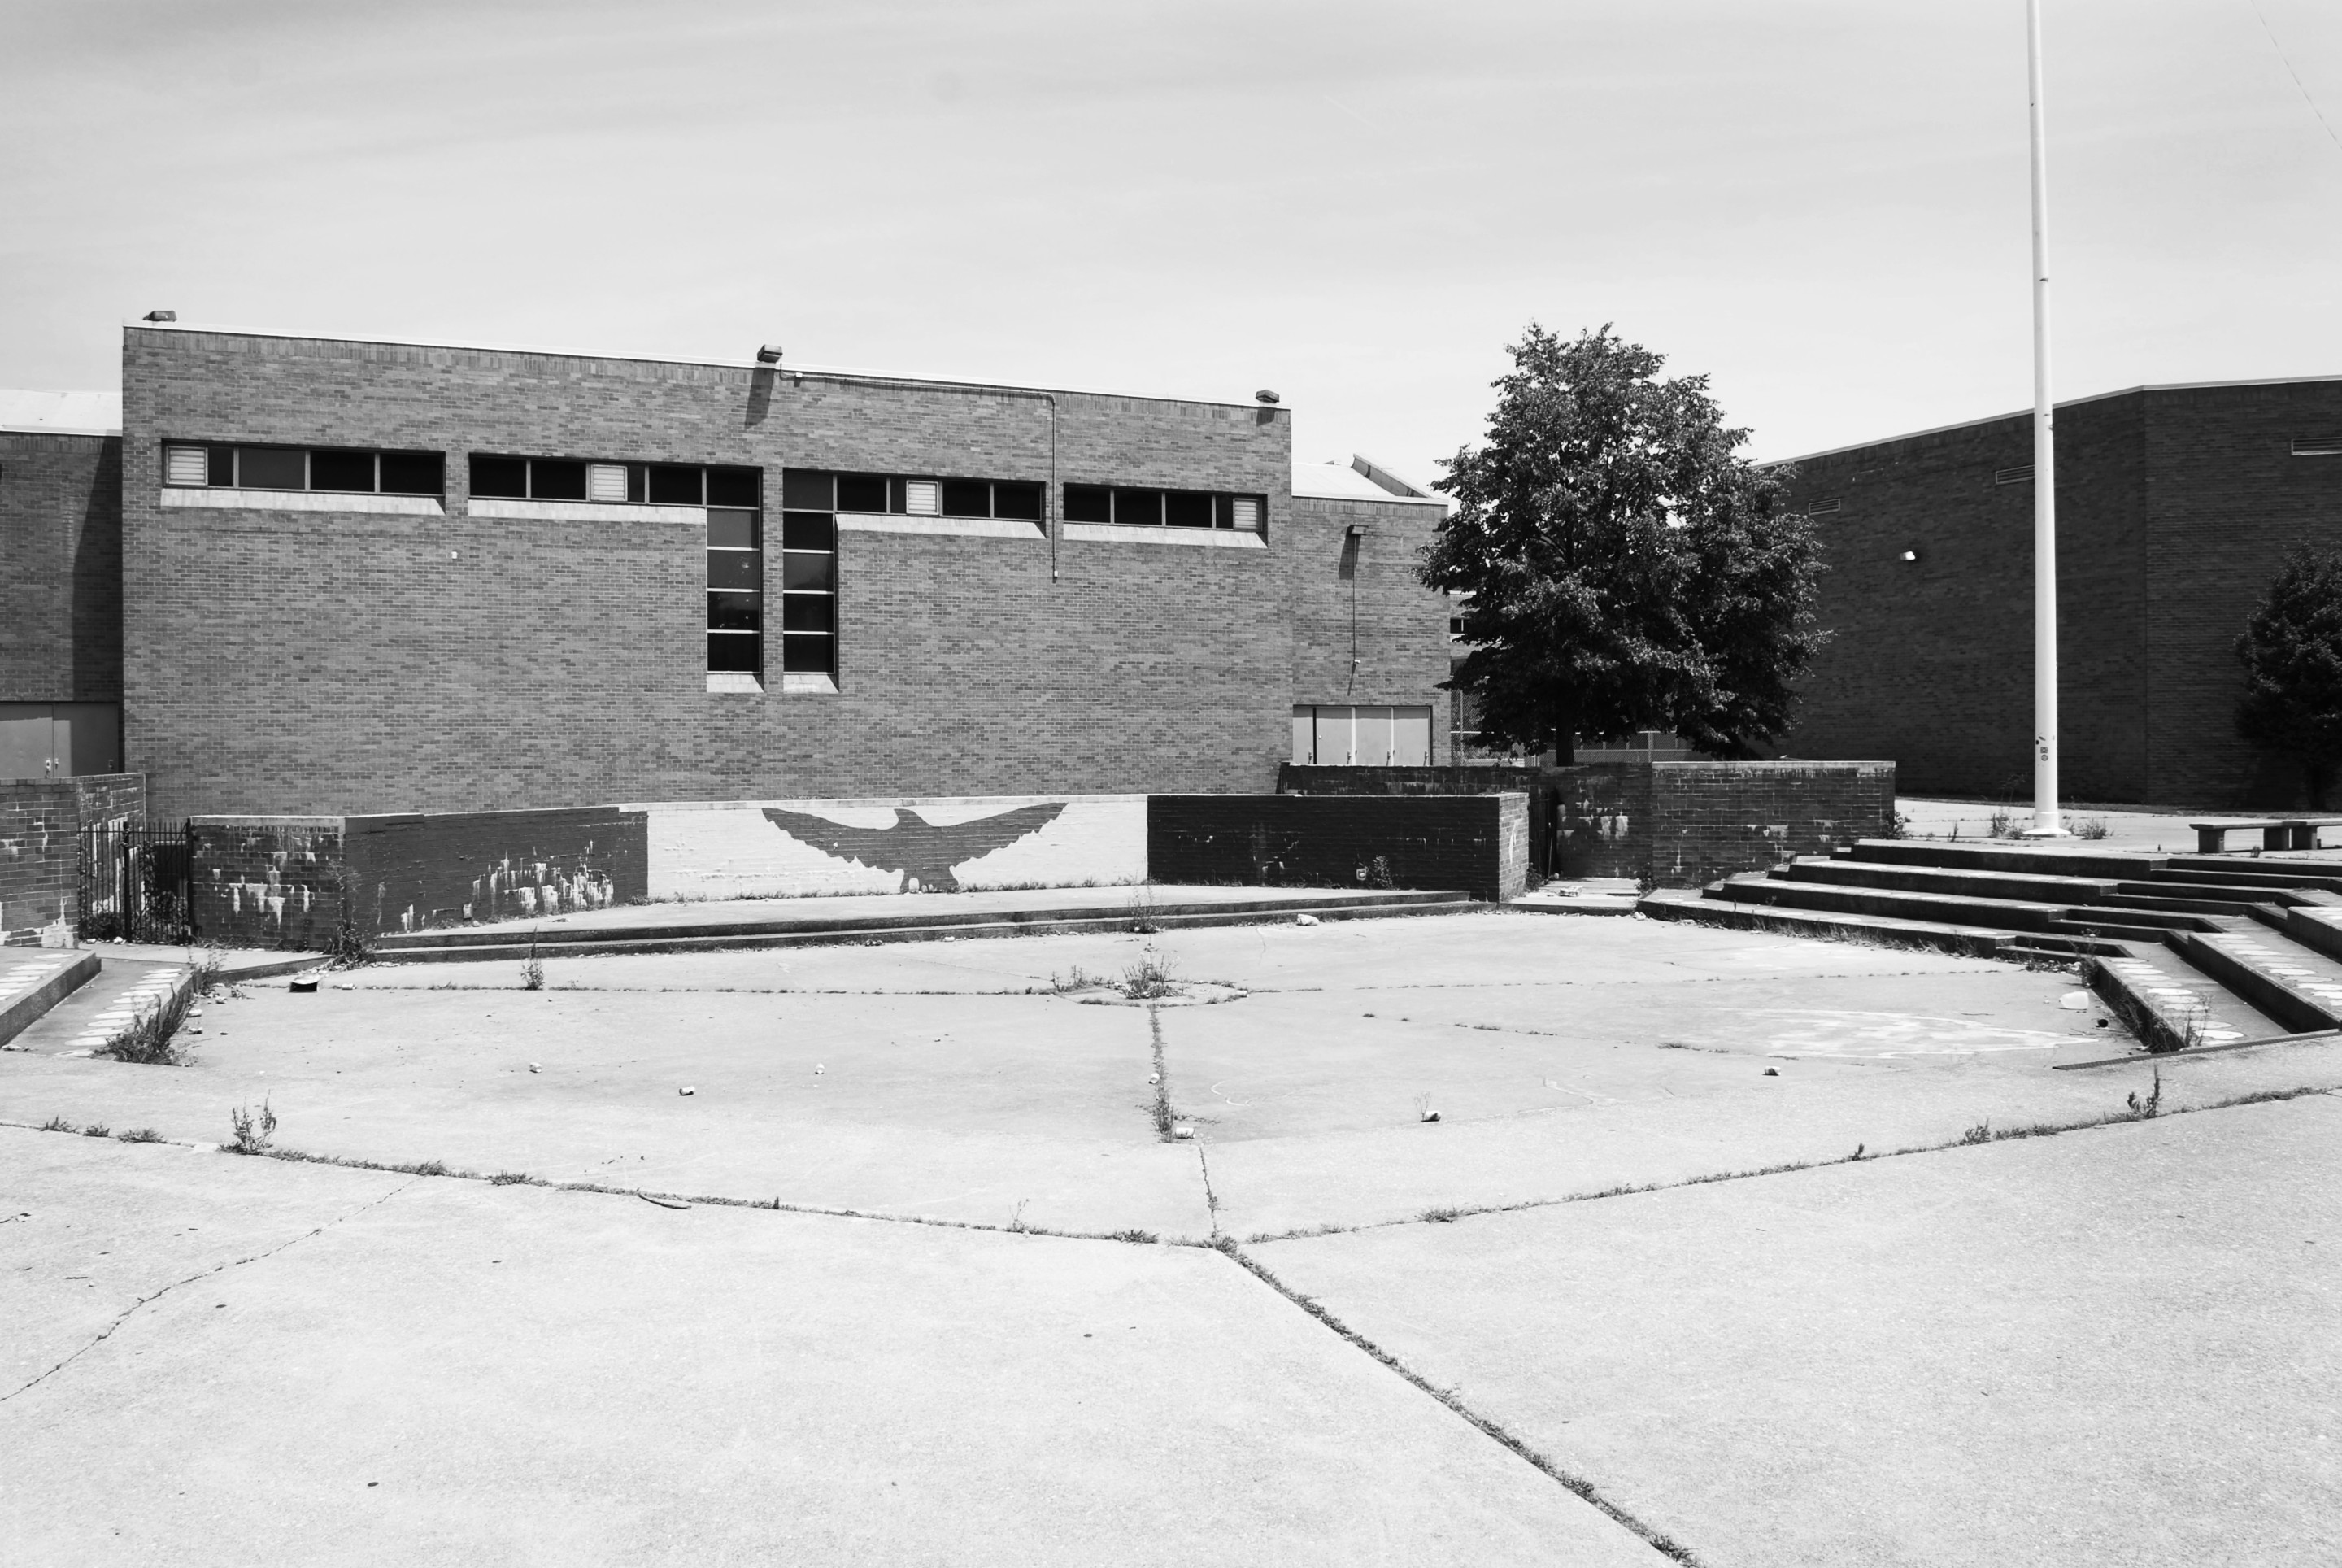 A black and white photo of a now demolished brutalist middle school